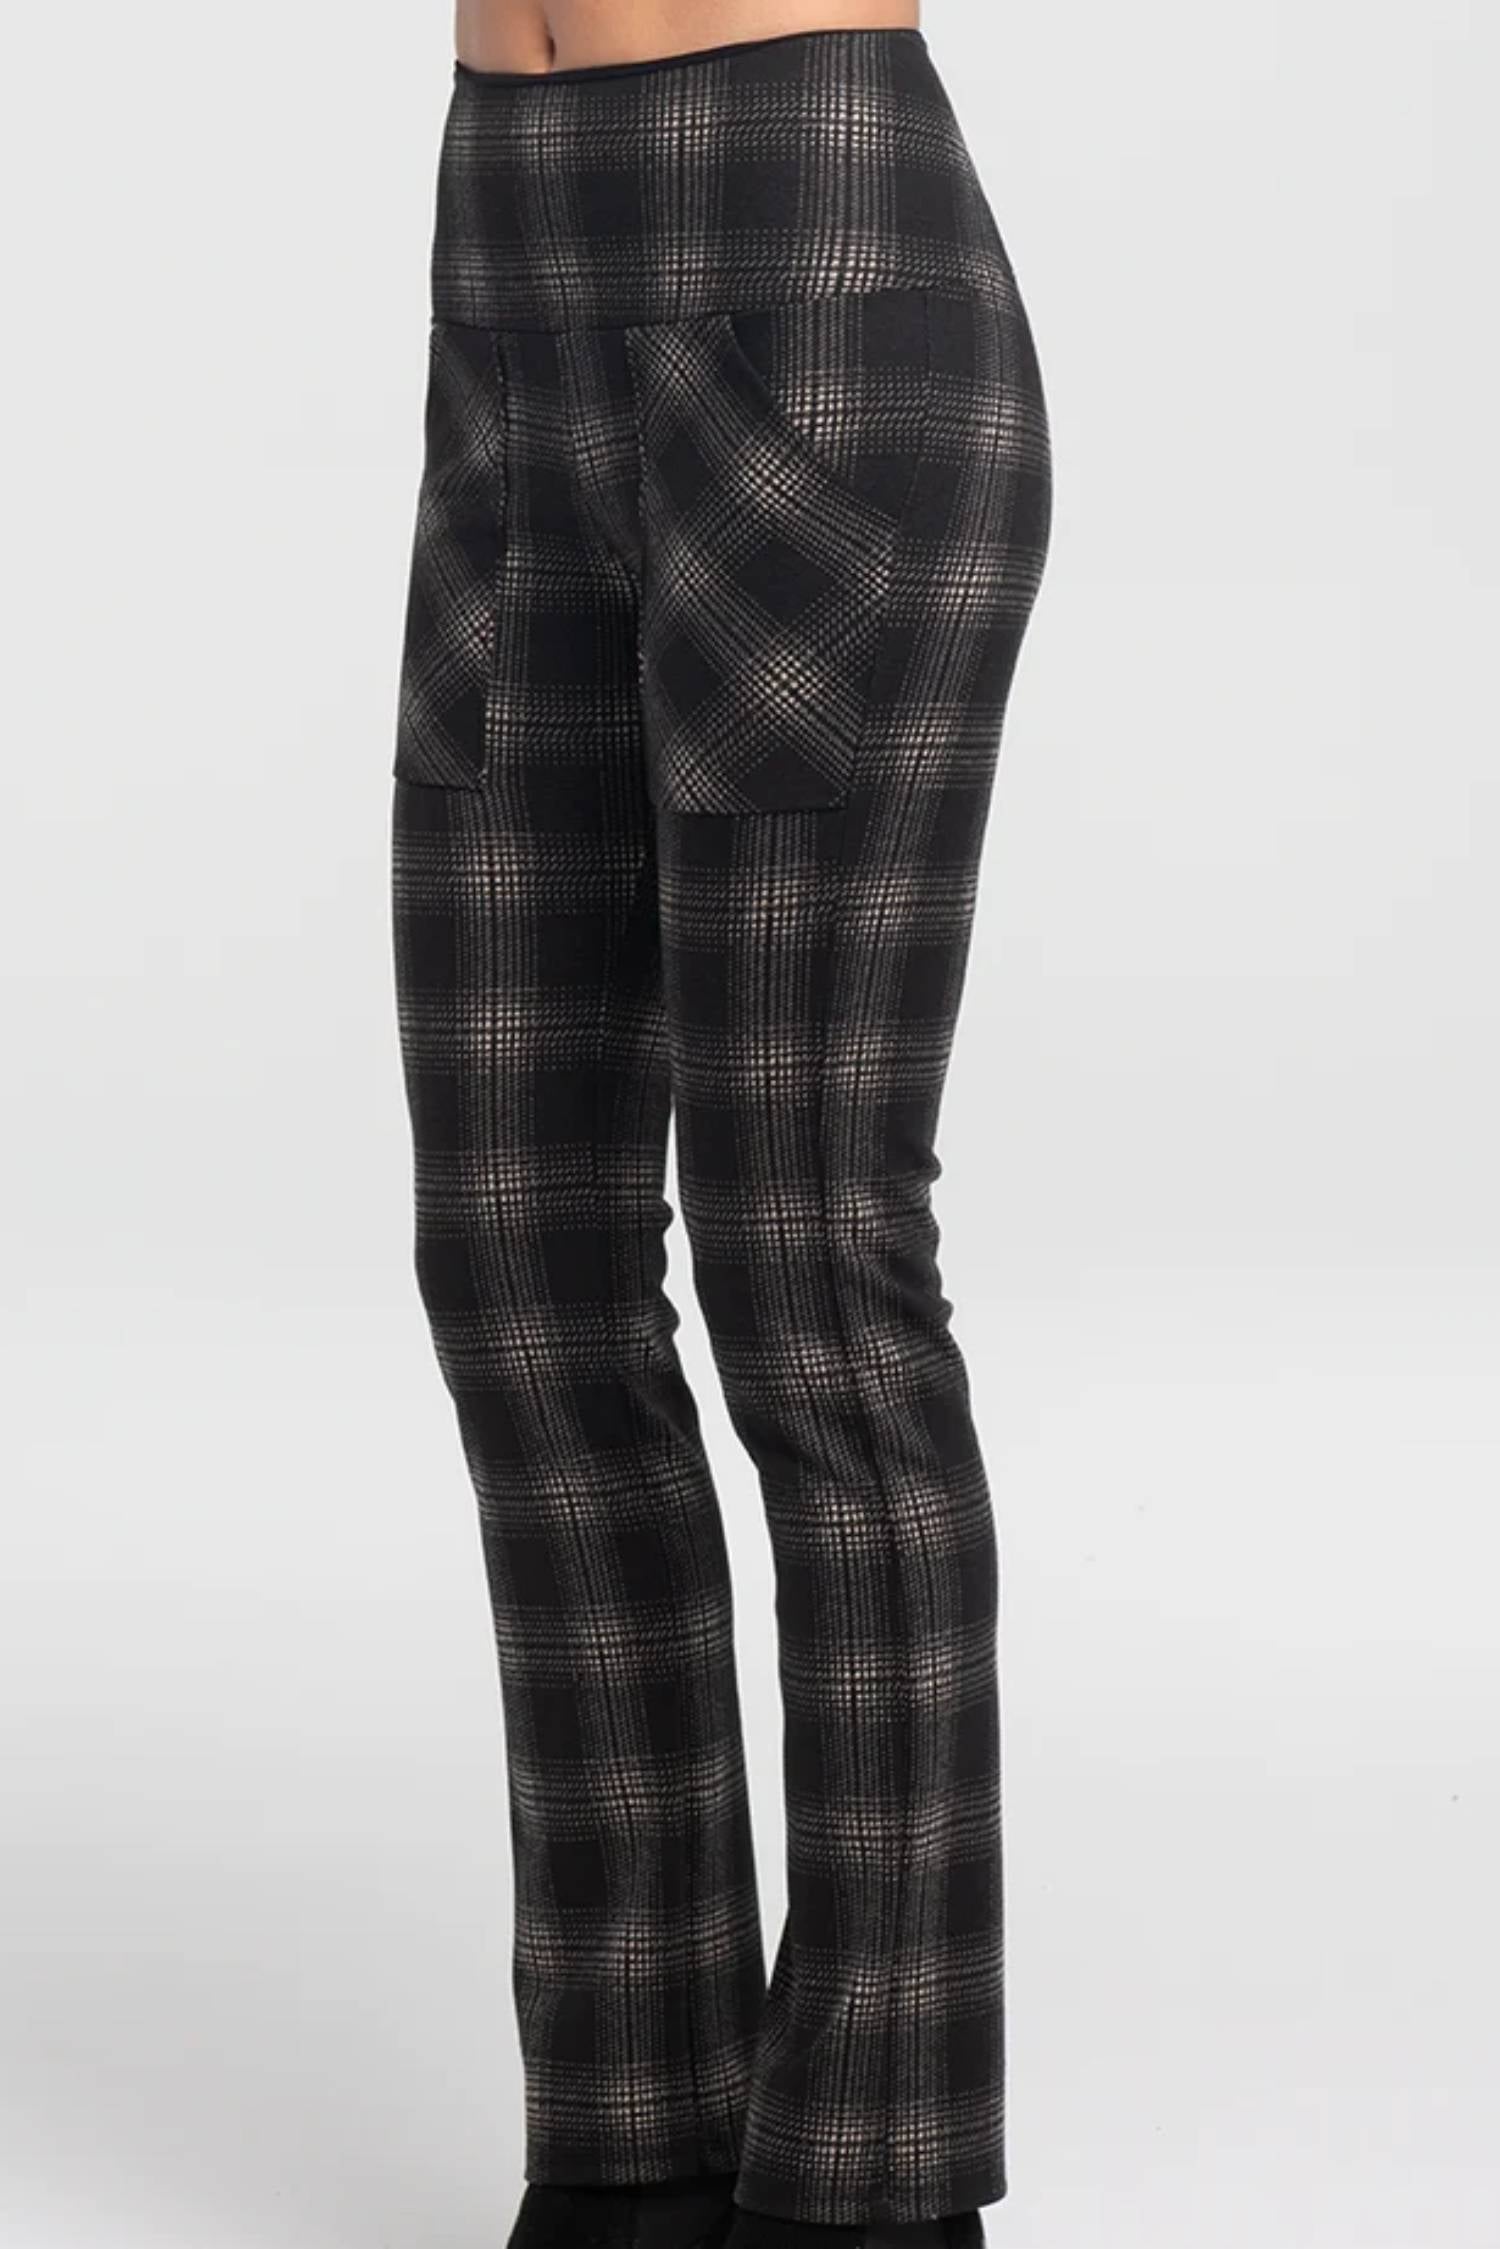 Irena Pants by Kollontai, Black, plaid, pull on waist, slim fit, patch pockets, sizes XS to XXL, made in Montreal